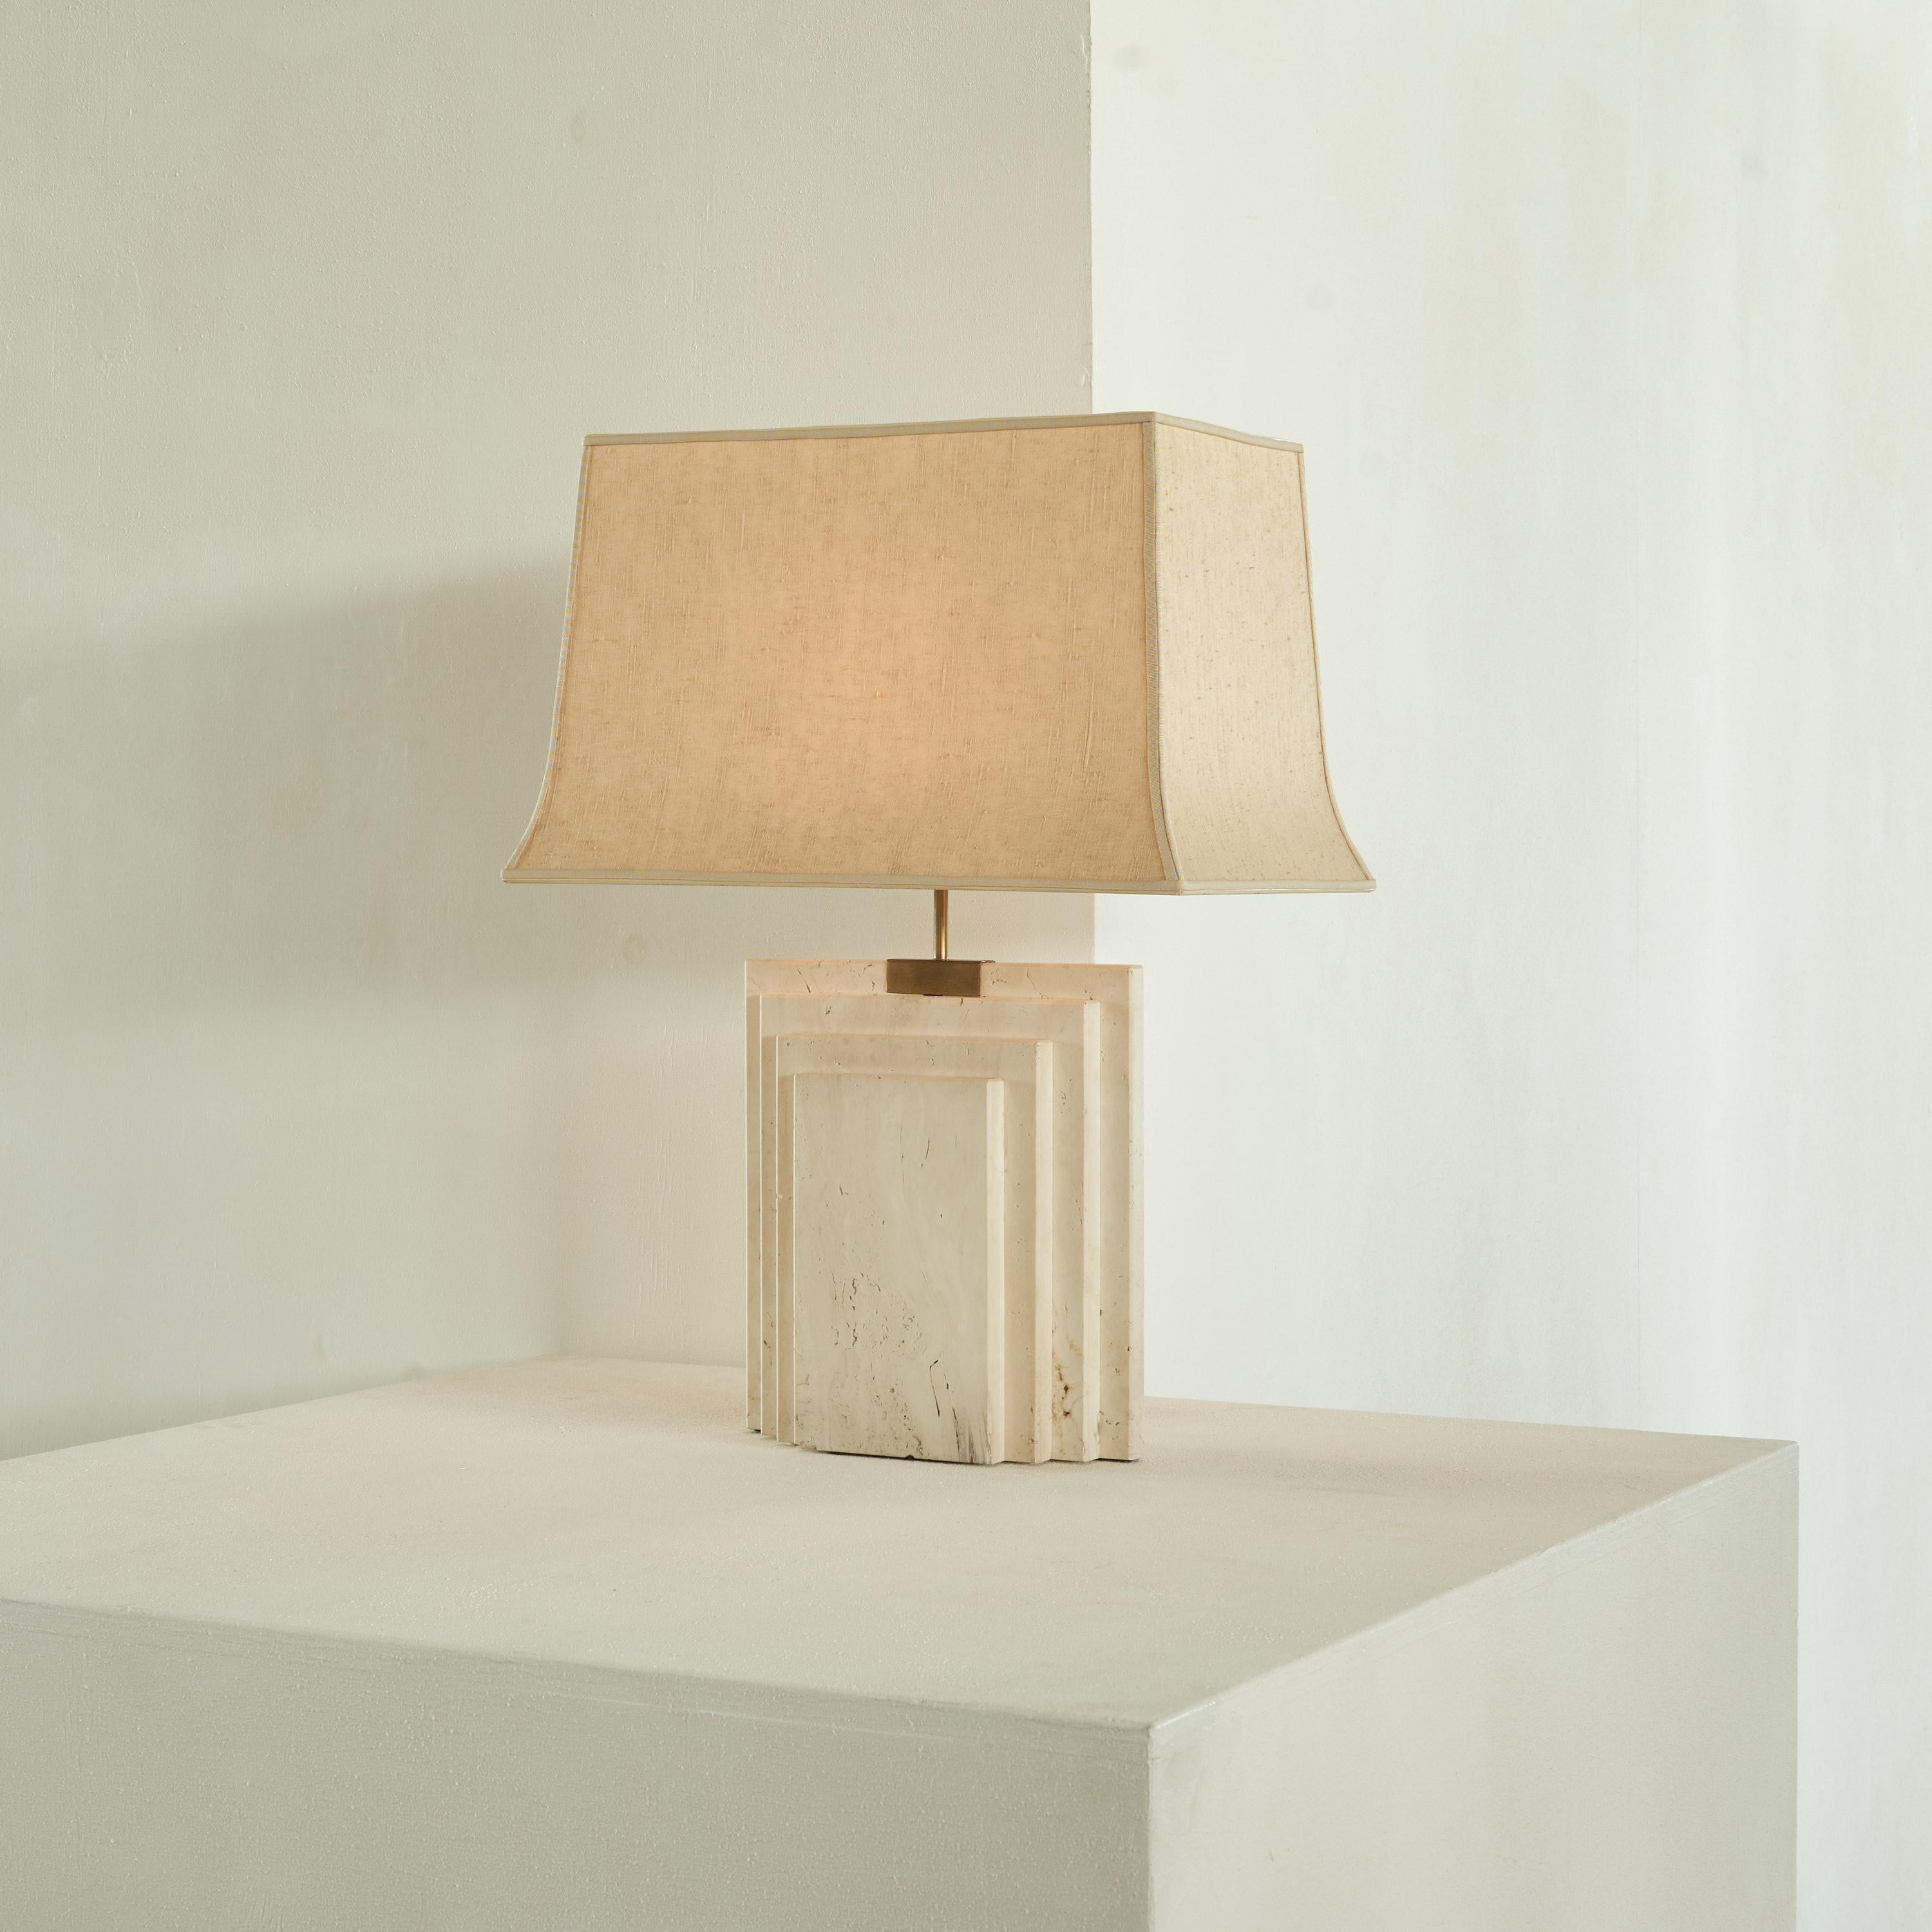 Architectural table lamp in travertine and brass, Belgium, 1970s.

This well sized and very heavy table lamp shows a modern, timeless design. Its stunning base was made in travertine, with a brass element on top holding the light bulb socket. The